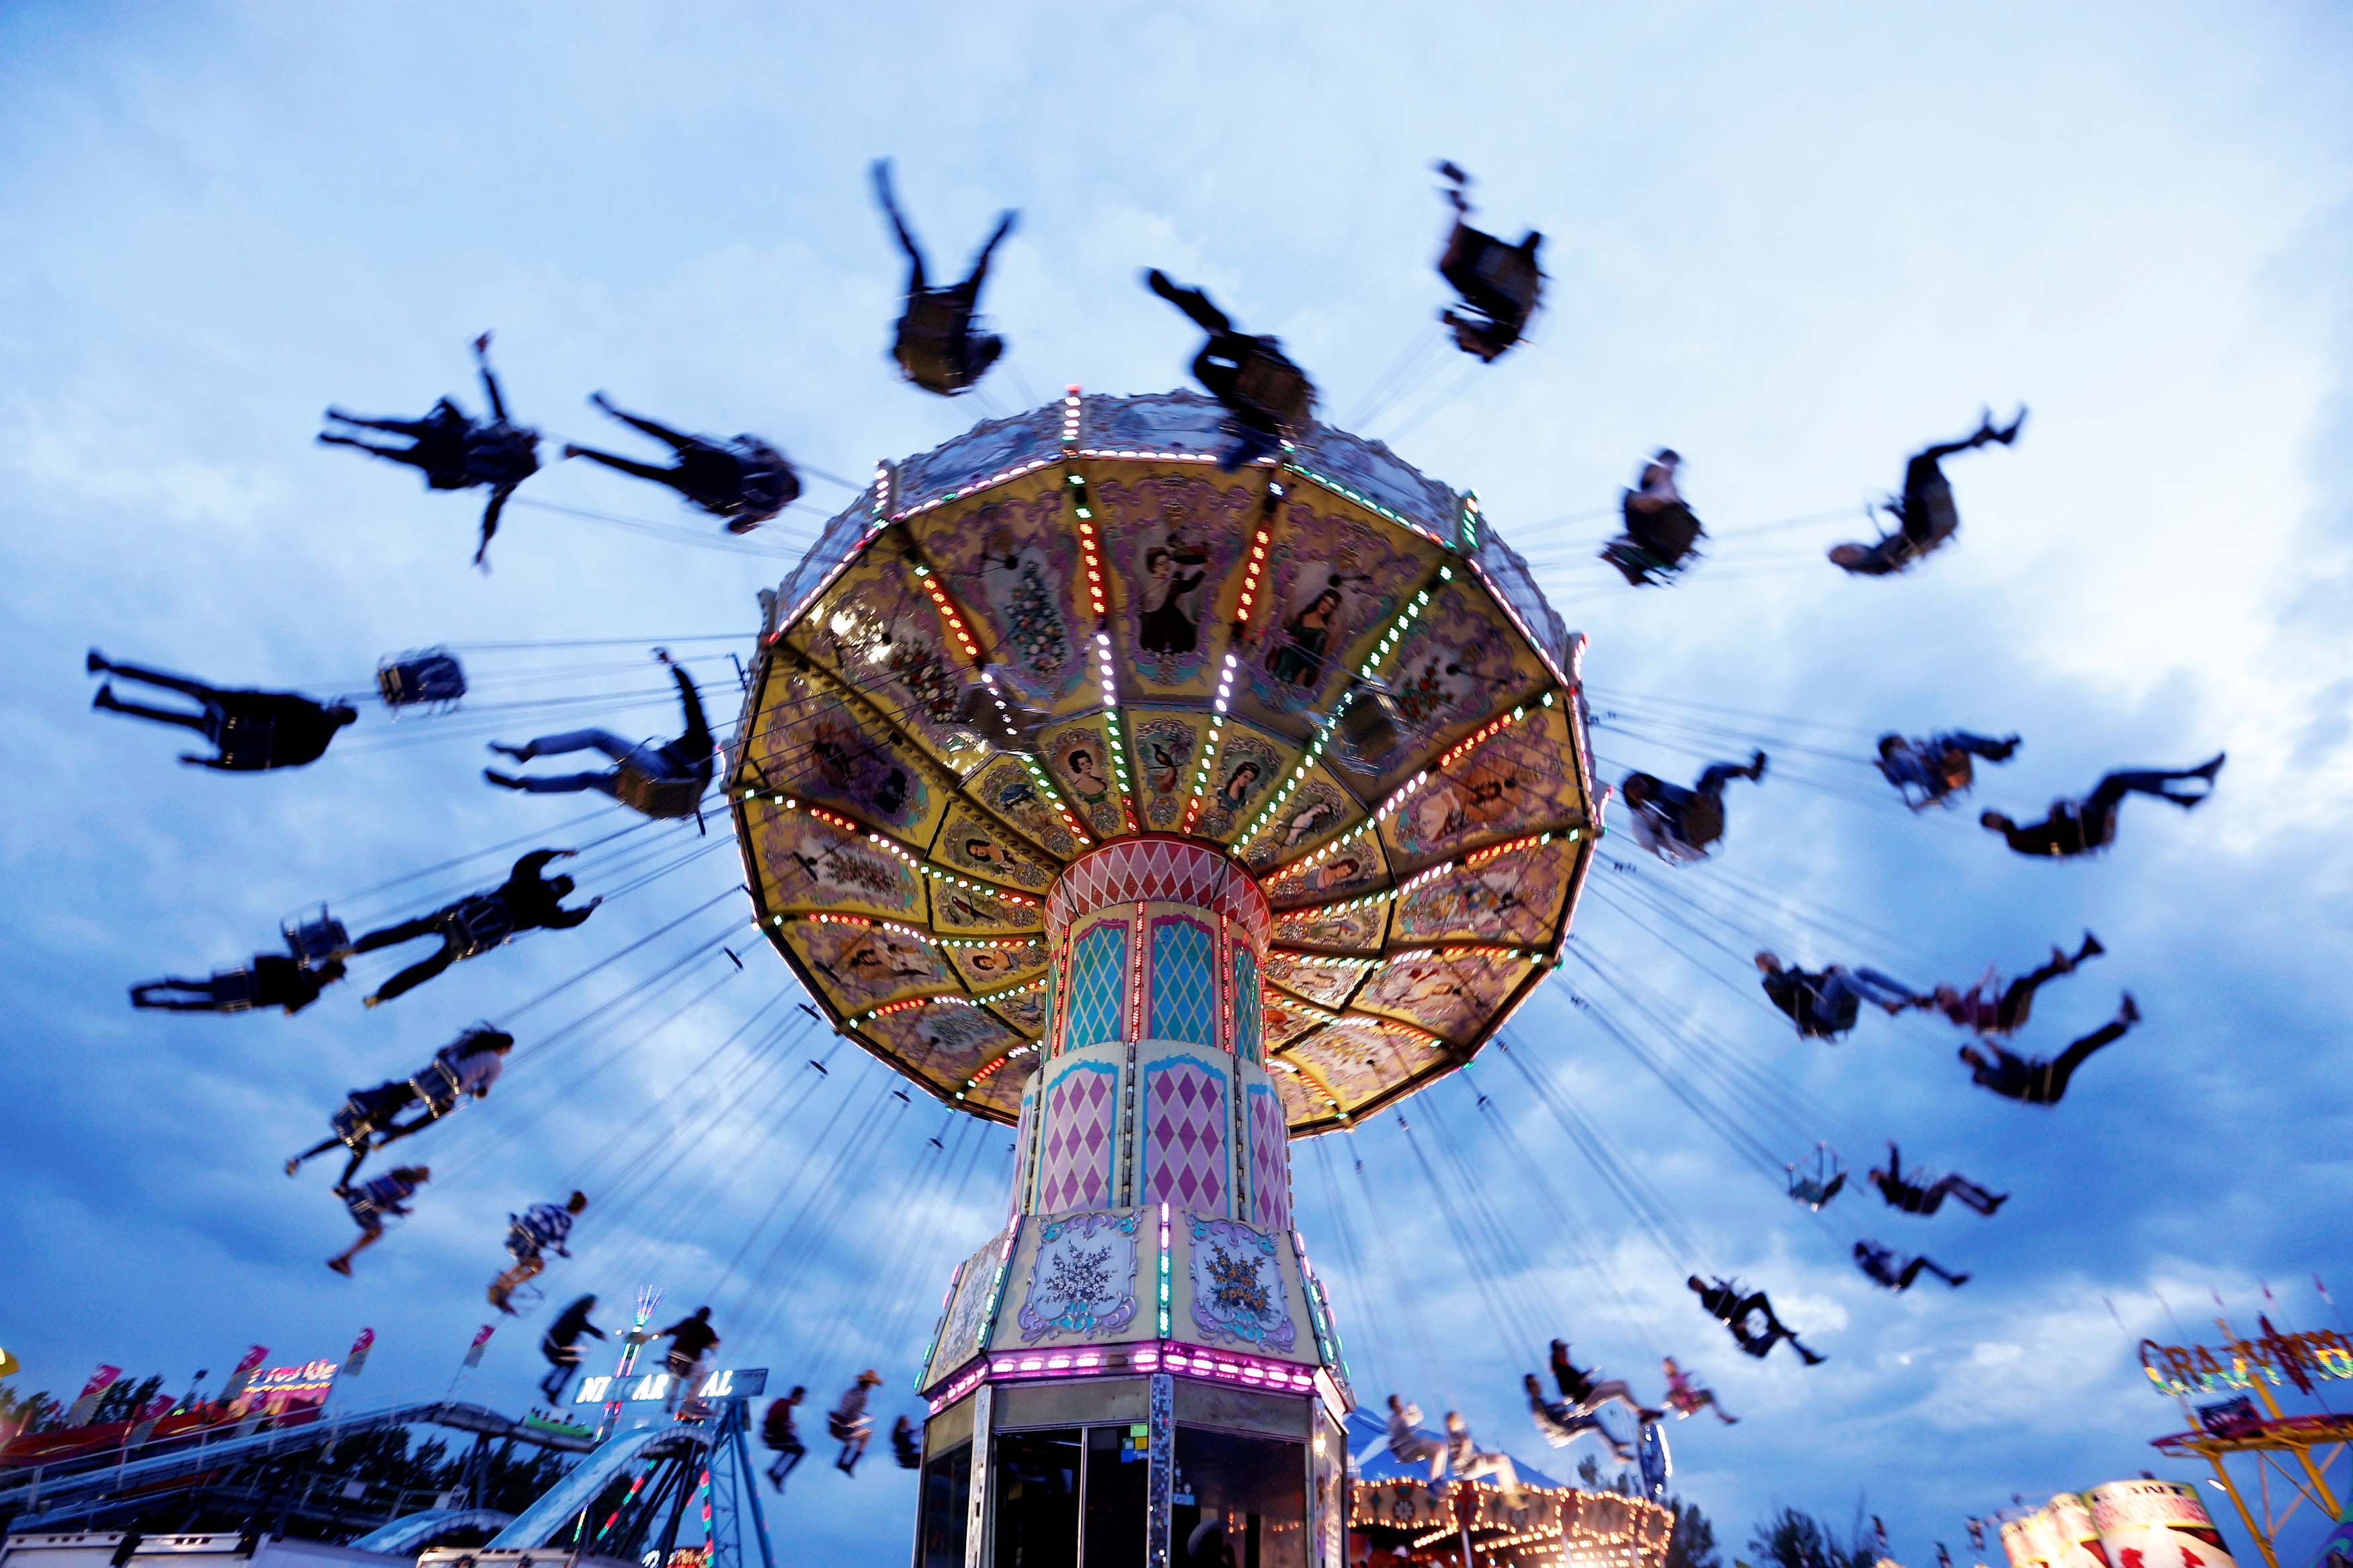 People swing on a ride in the midway during the Calgary Stampede in Calgary, Alberta, Canada on July 14, 2016. Photo: Reuters